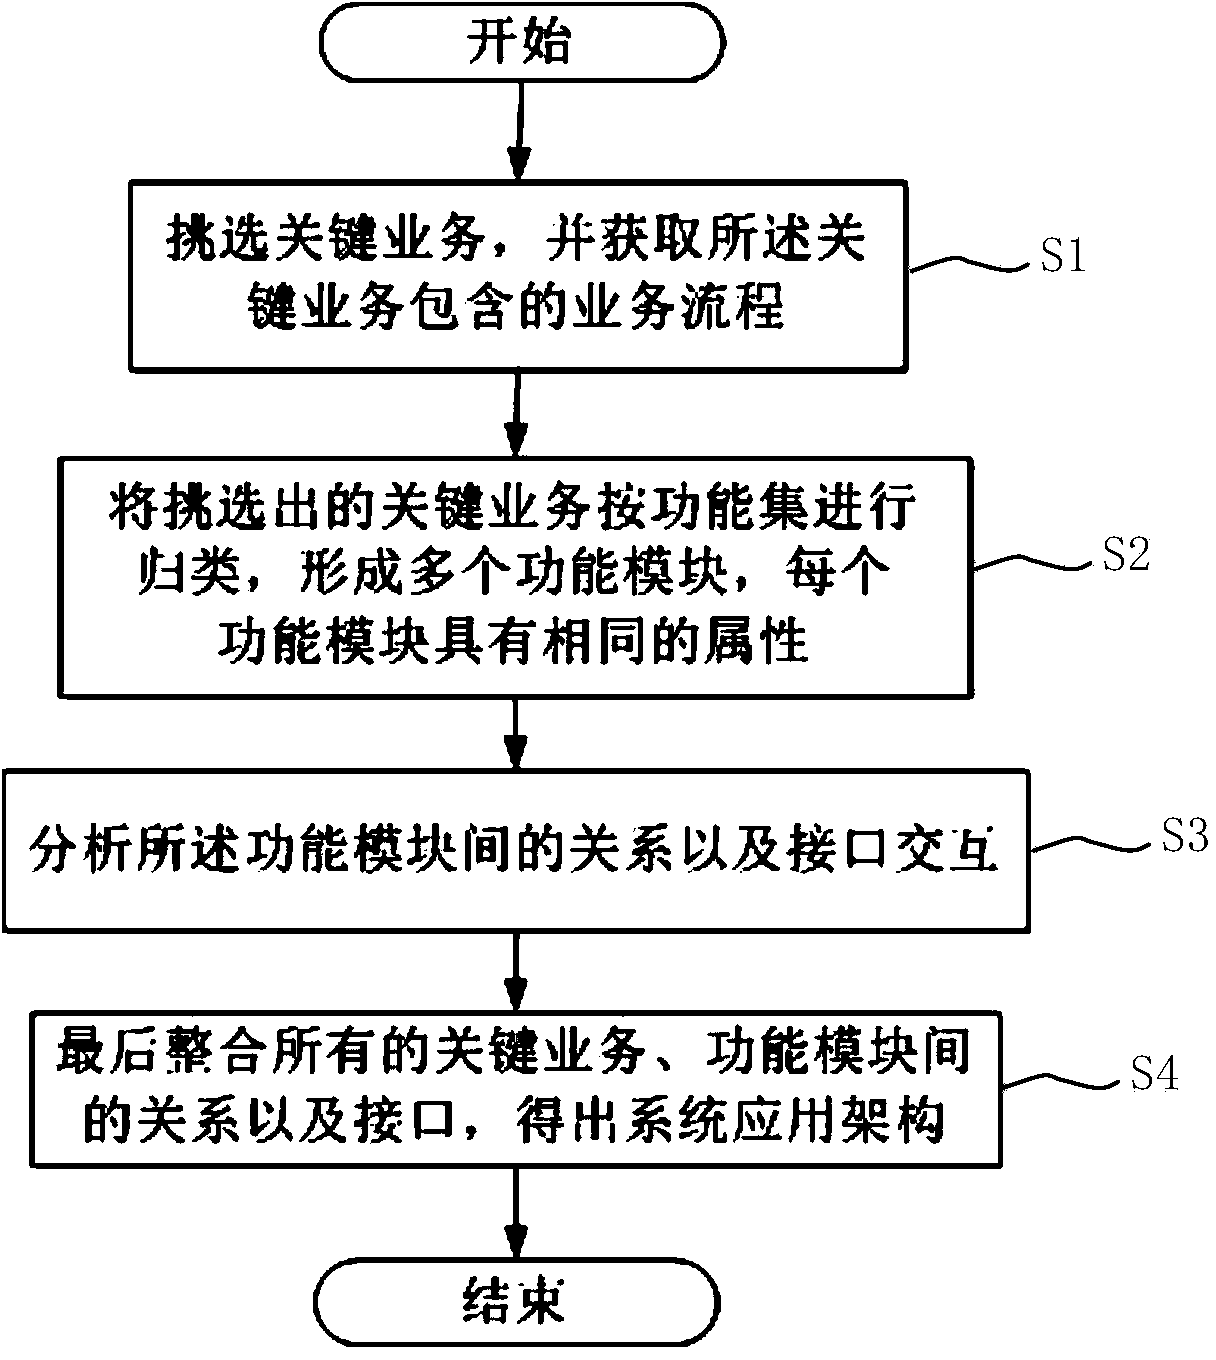 System alteration risk control method based on business